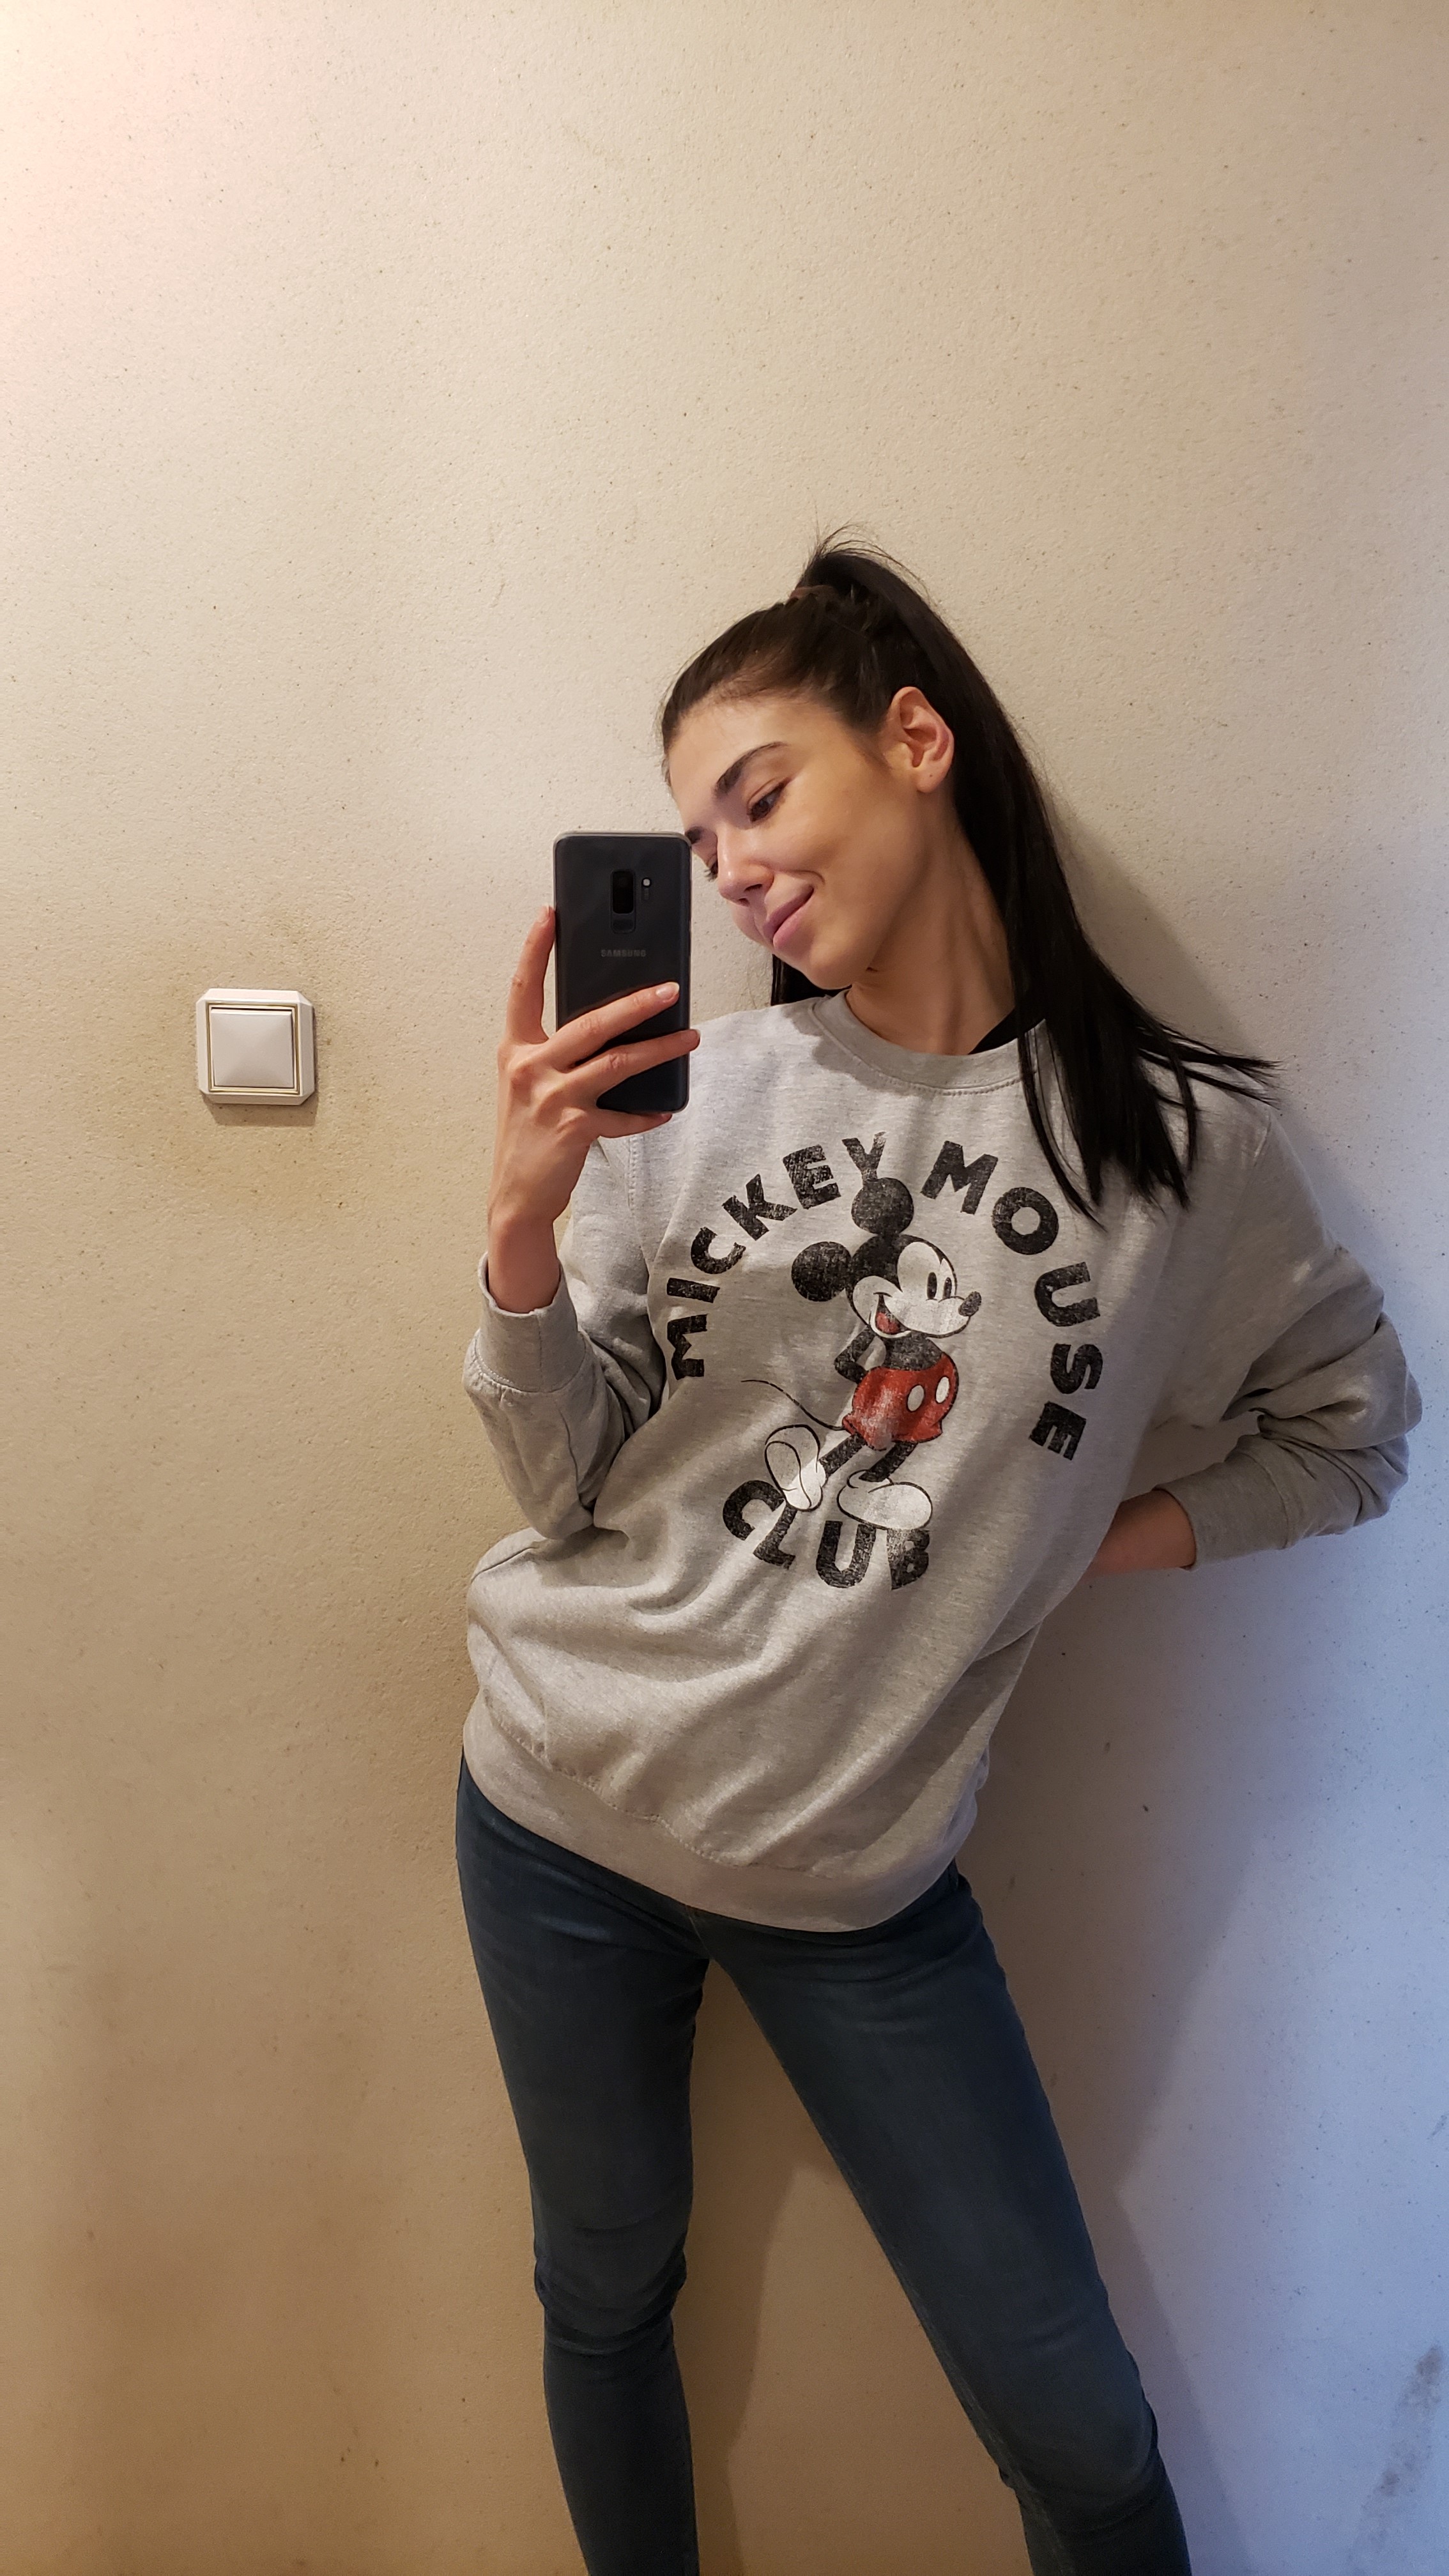 Disney Women's Mickey Mouse Club Sweatshirt Amazon Fashion What I Bought In September ‘19